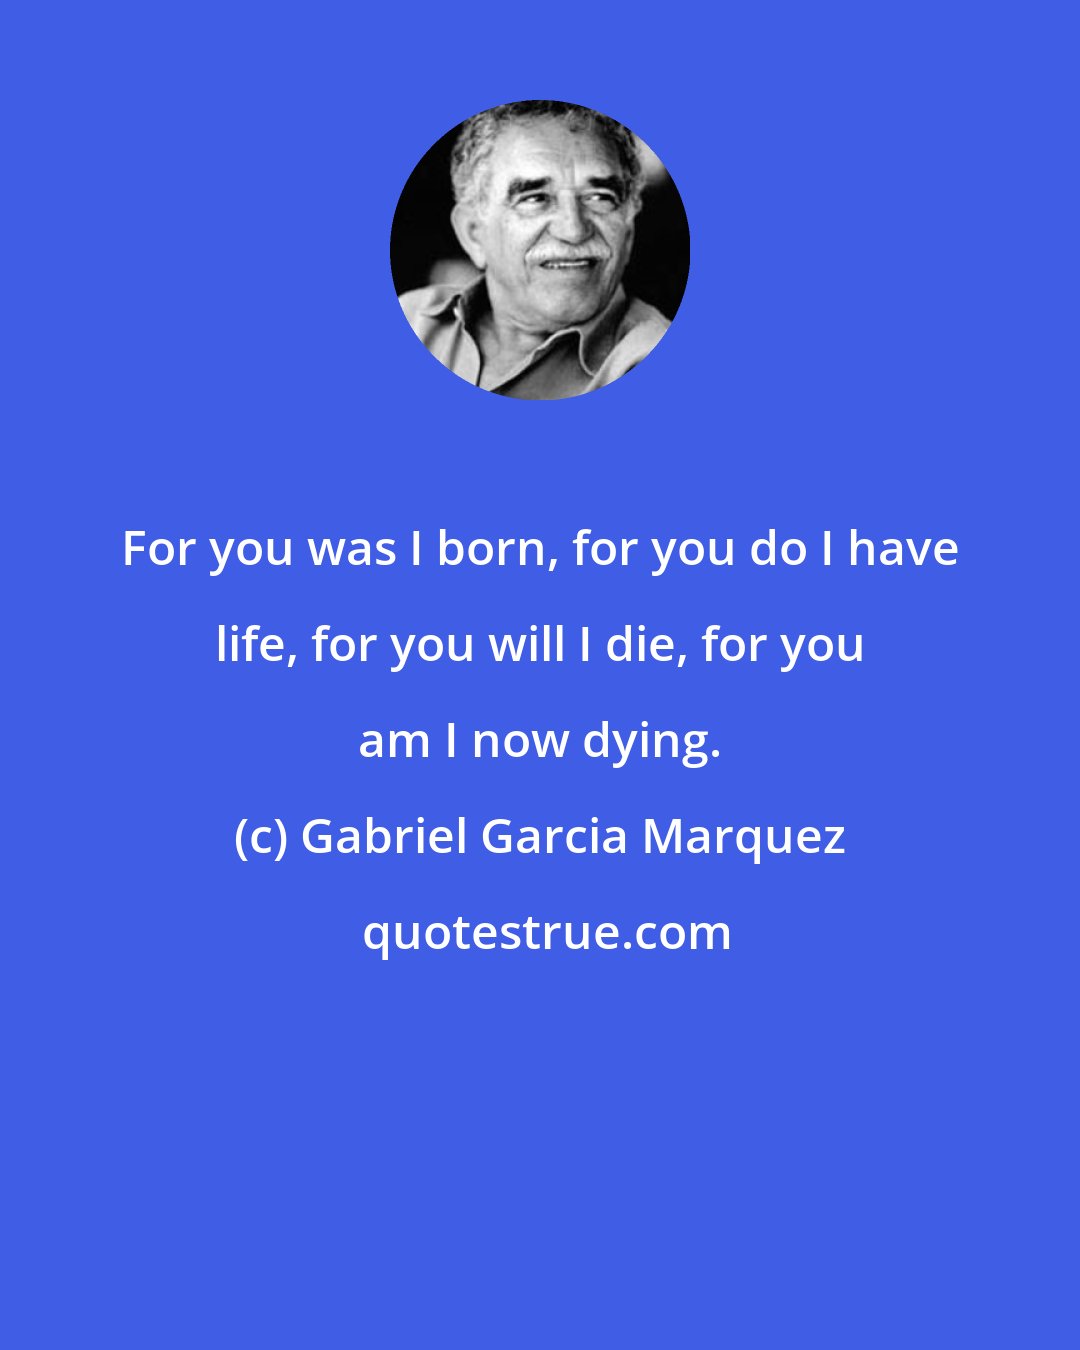 Gabriel Garcia Marquez: For you was I born, for you do I have life, for you will I die, for you am I now dying.